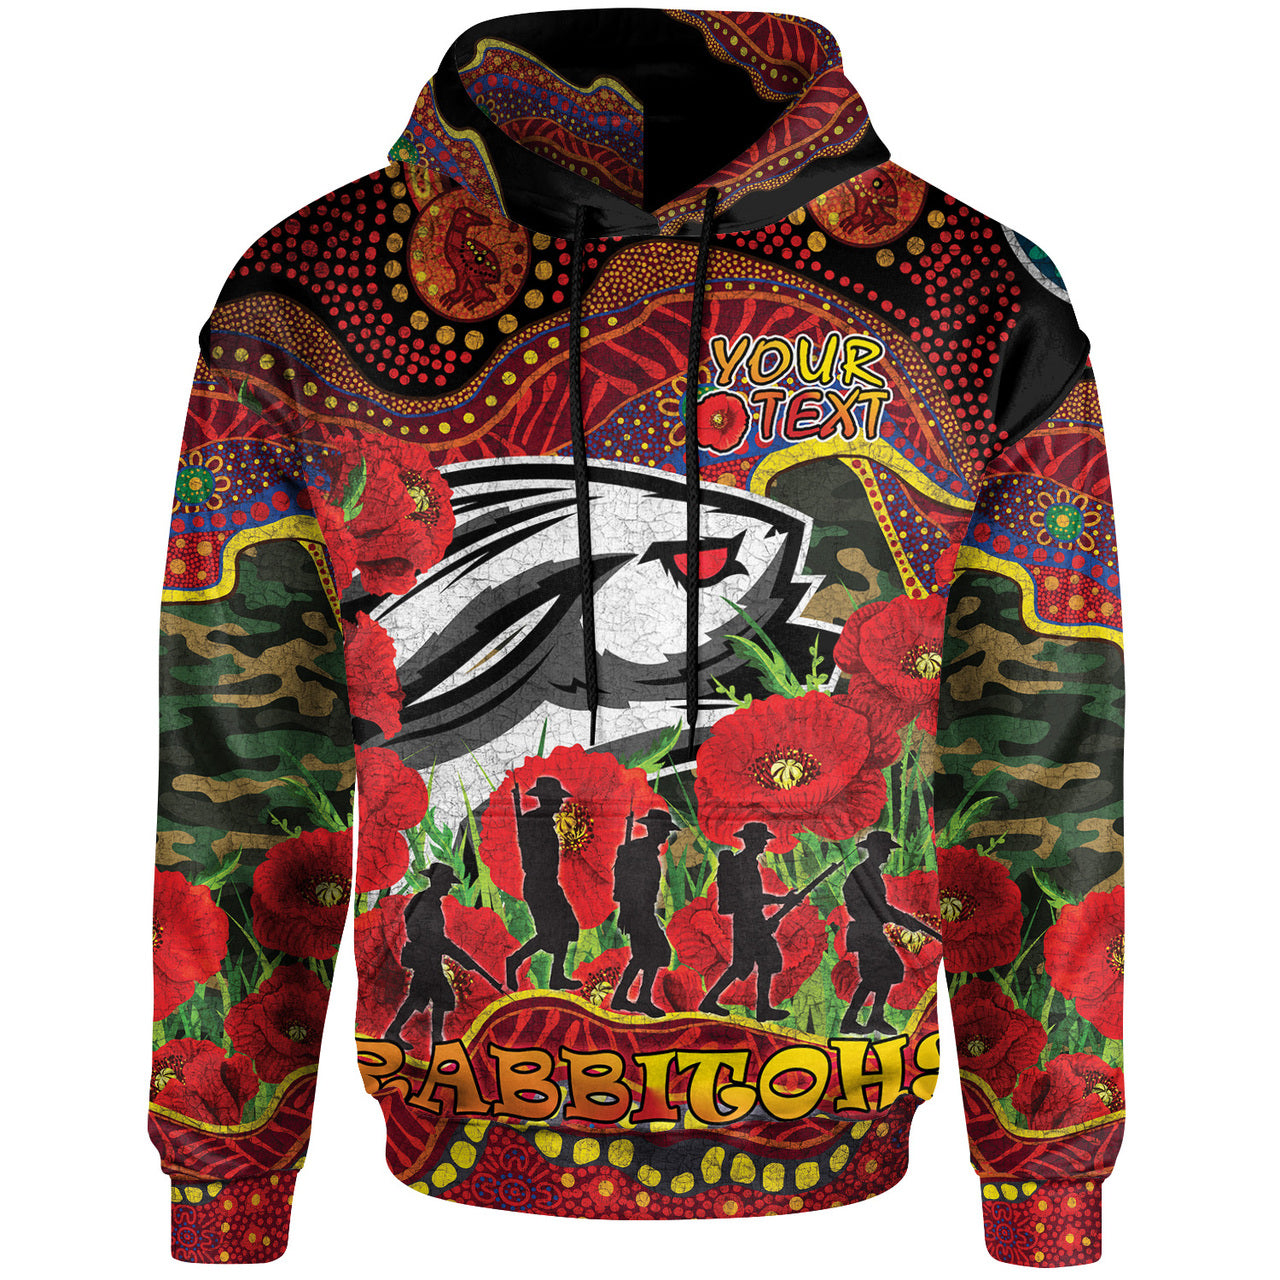 rabbitohs-rugby-aboriginal-anzac-day-custom-hoodie-lest-we-forget-rabbitohs-with-poppy-flower